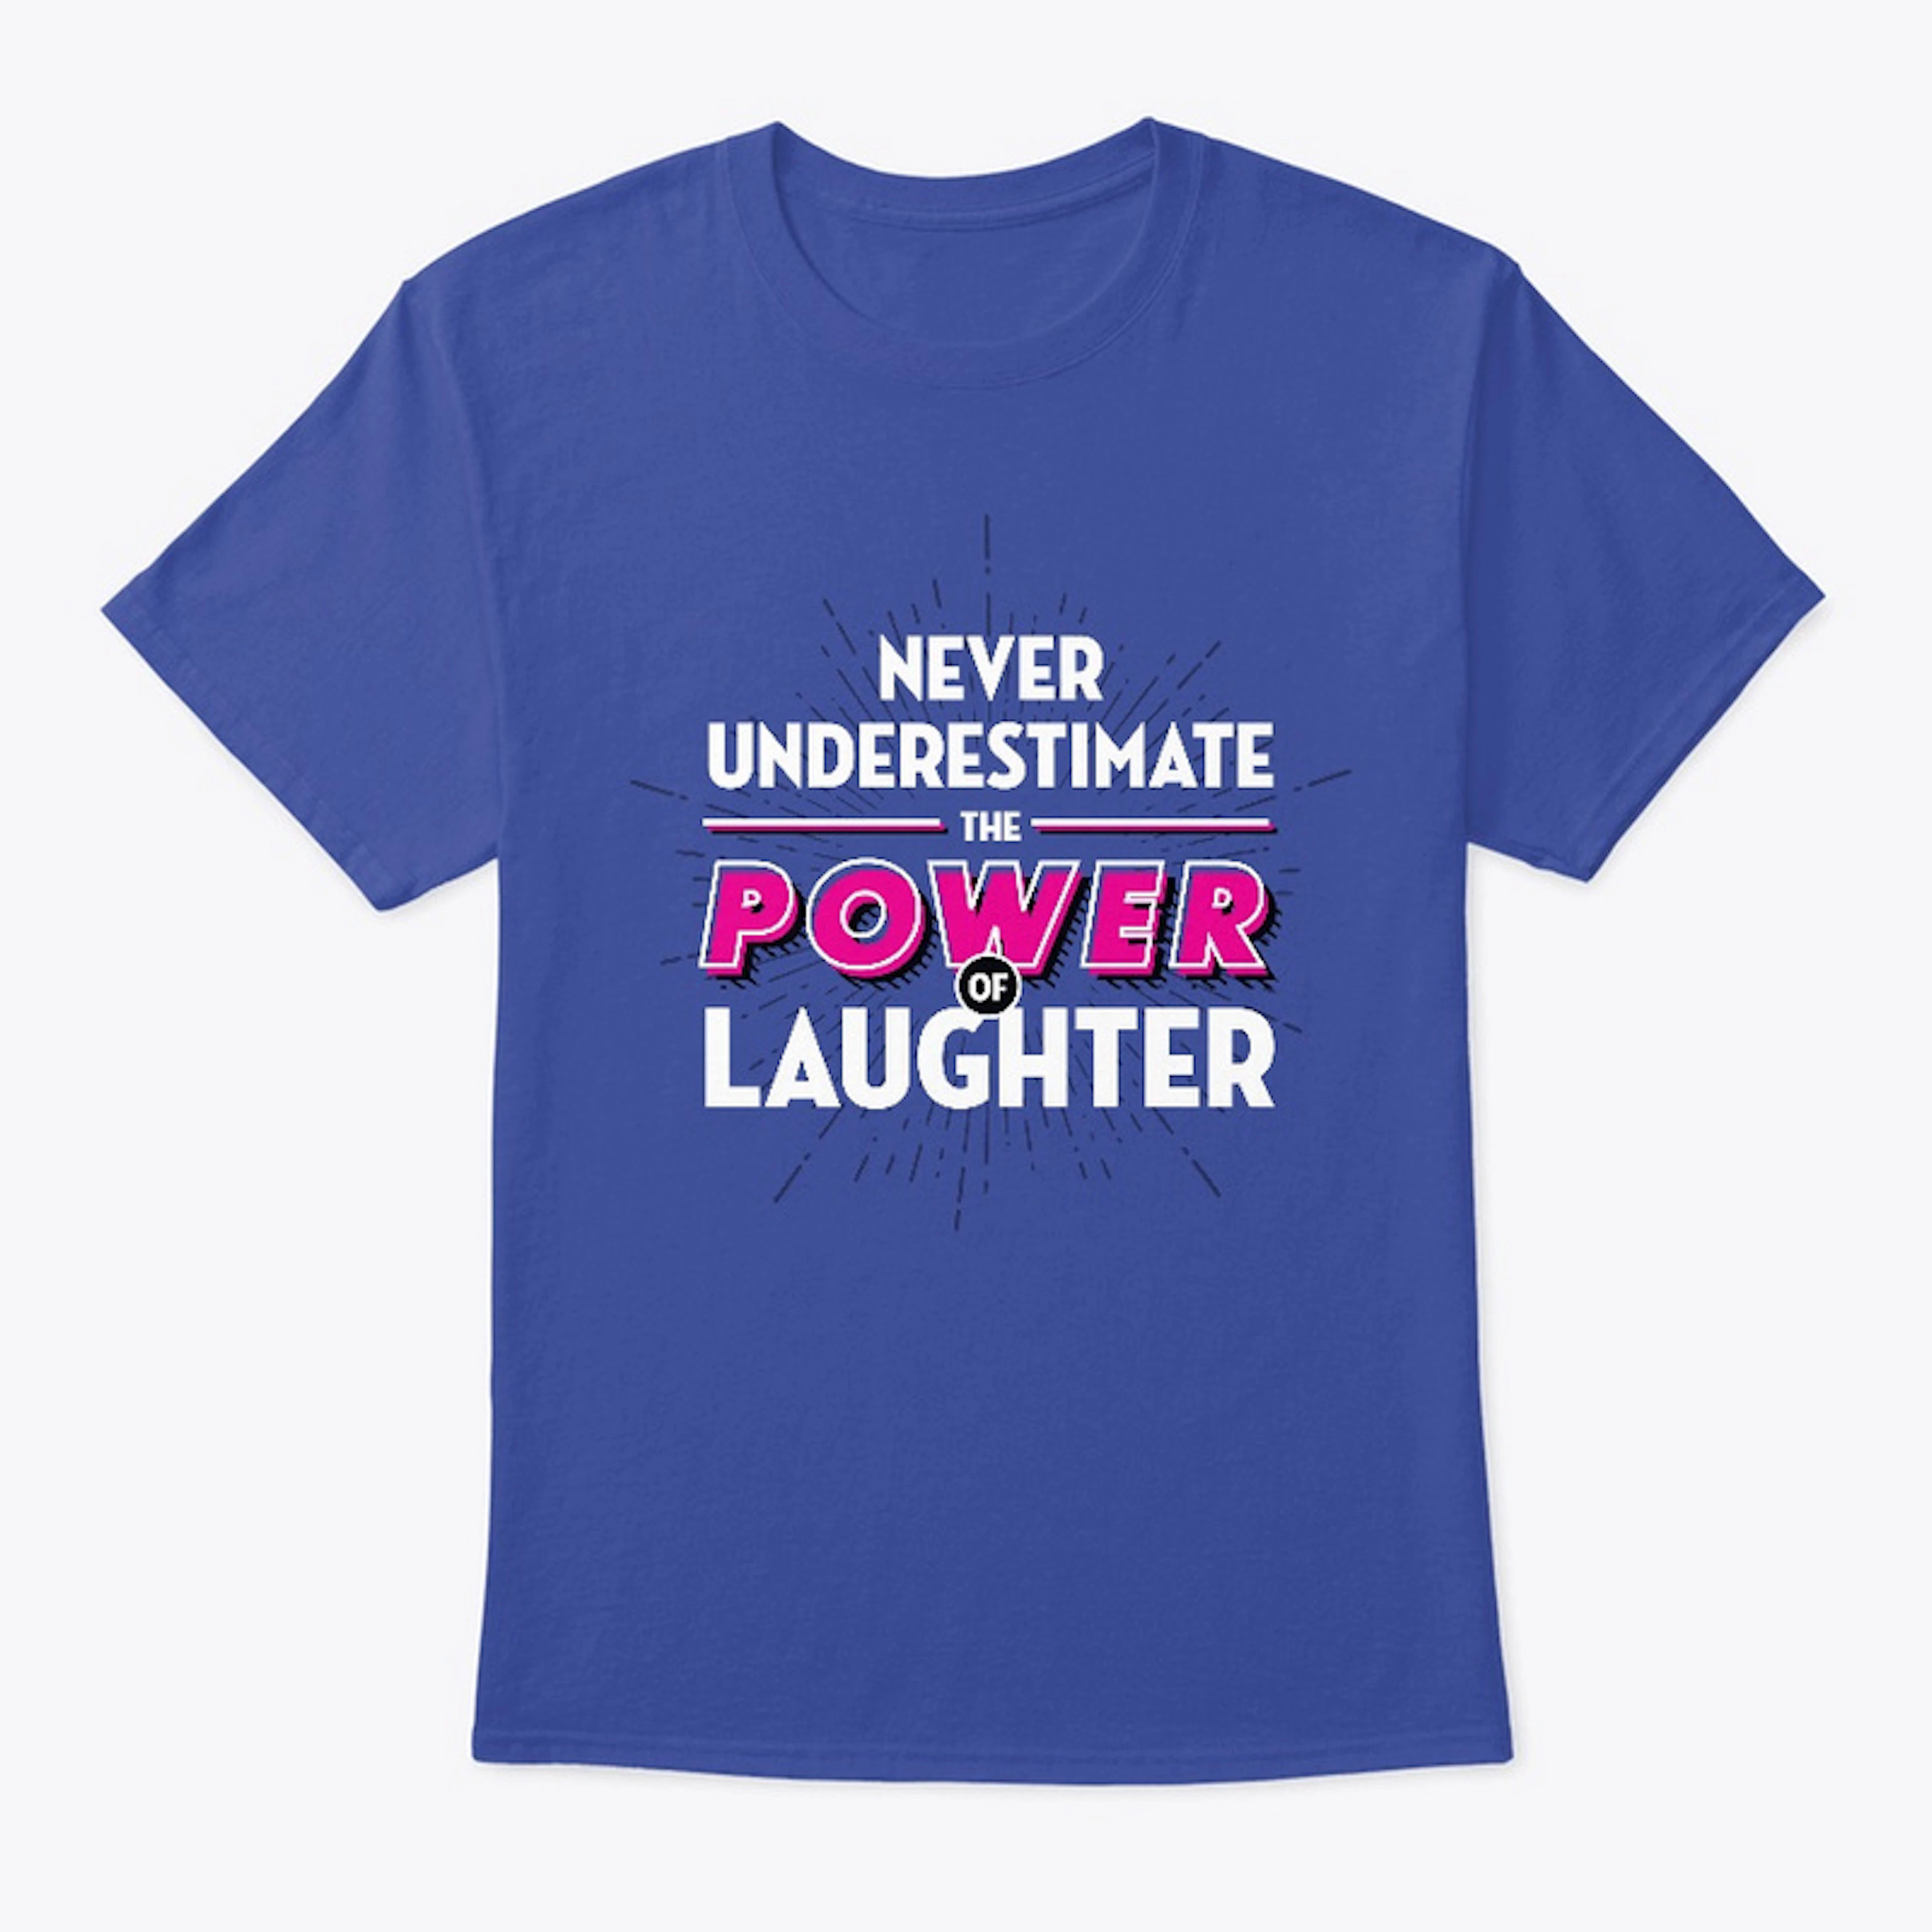 Never underestimate power of laughter